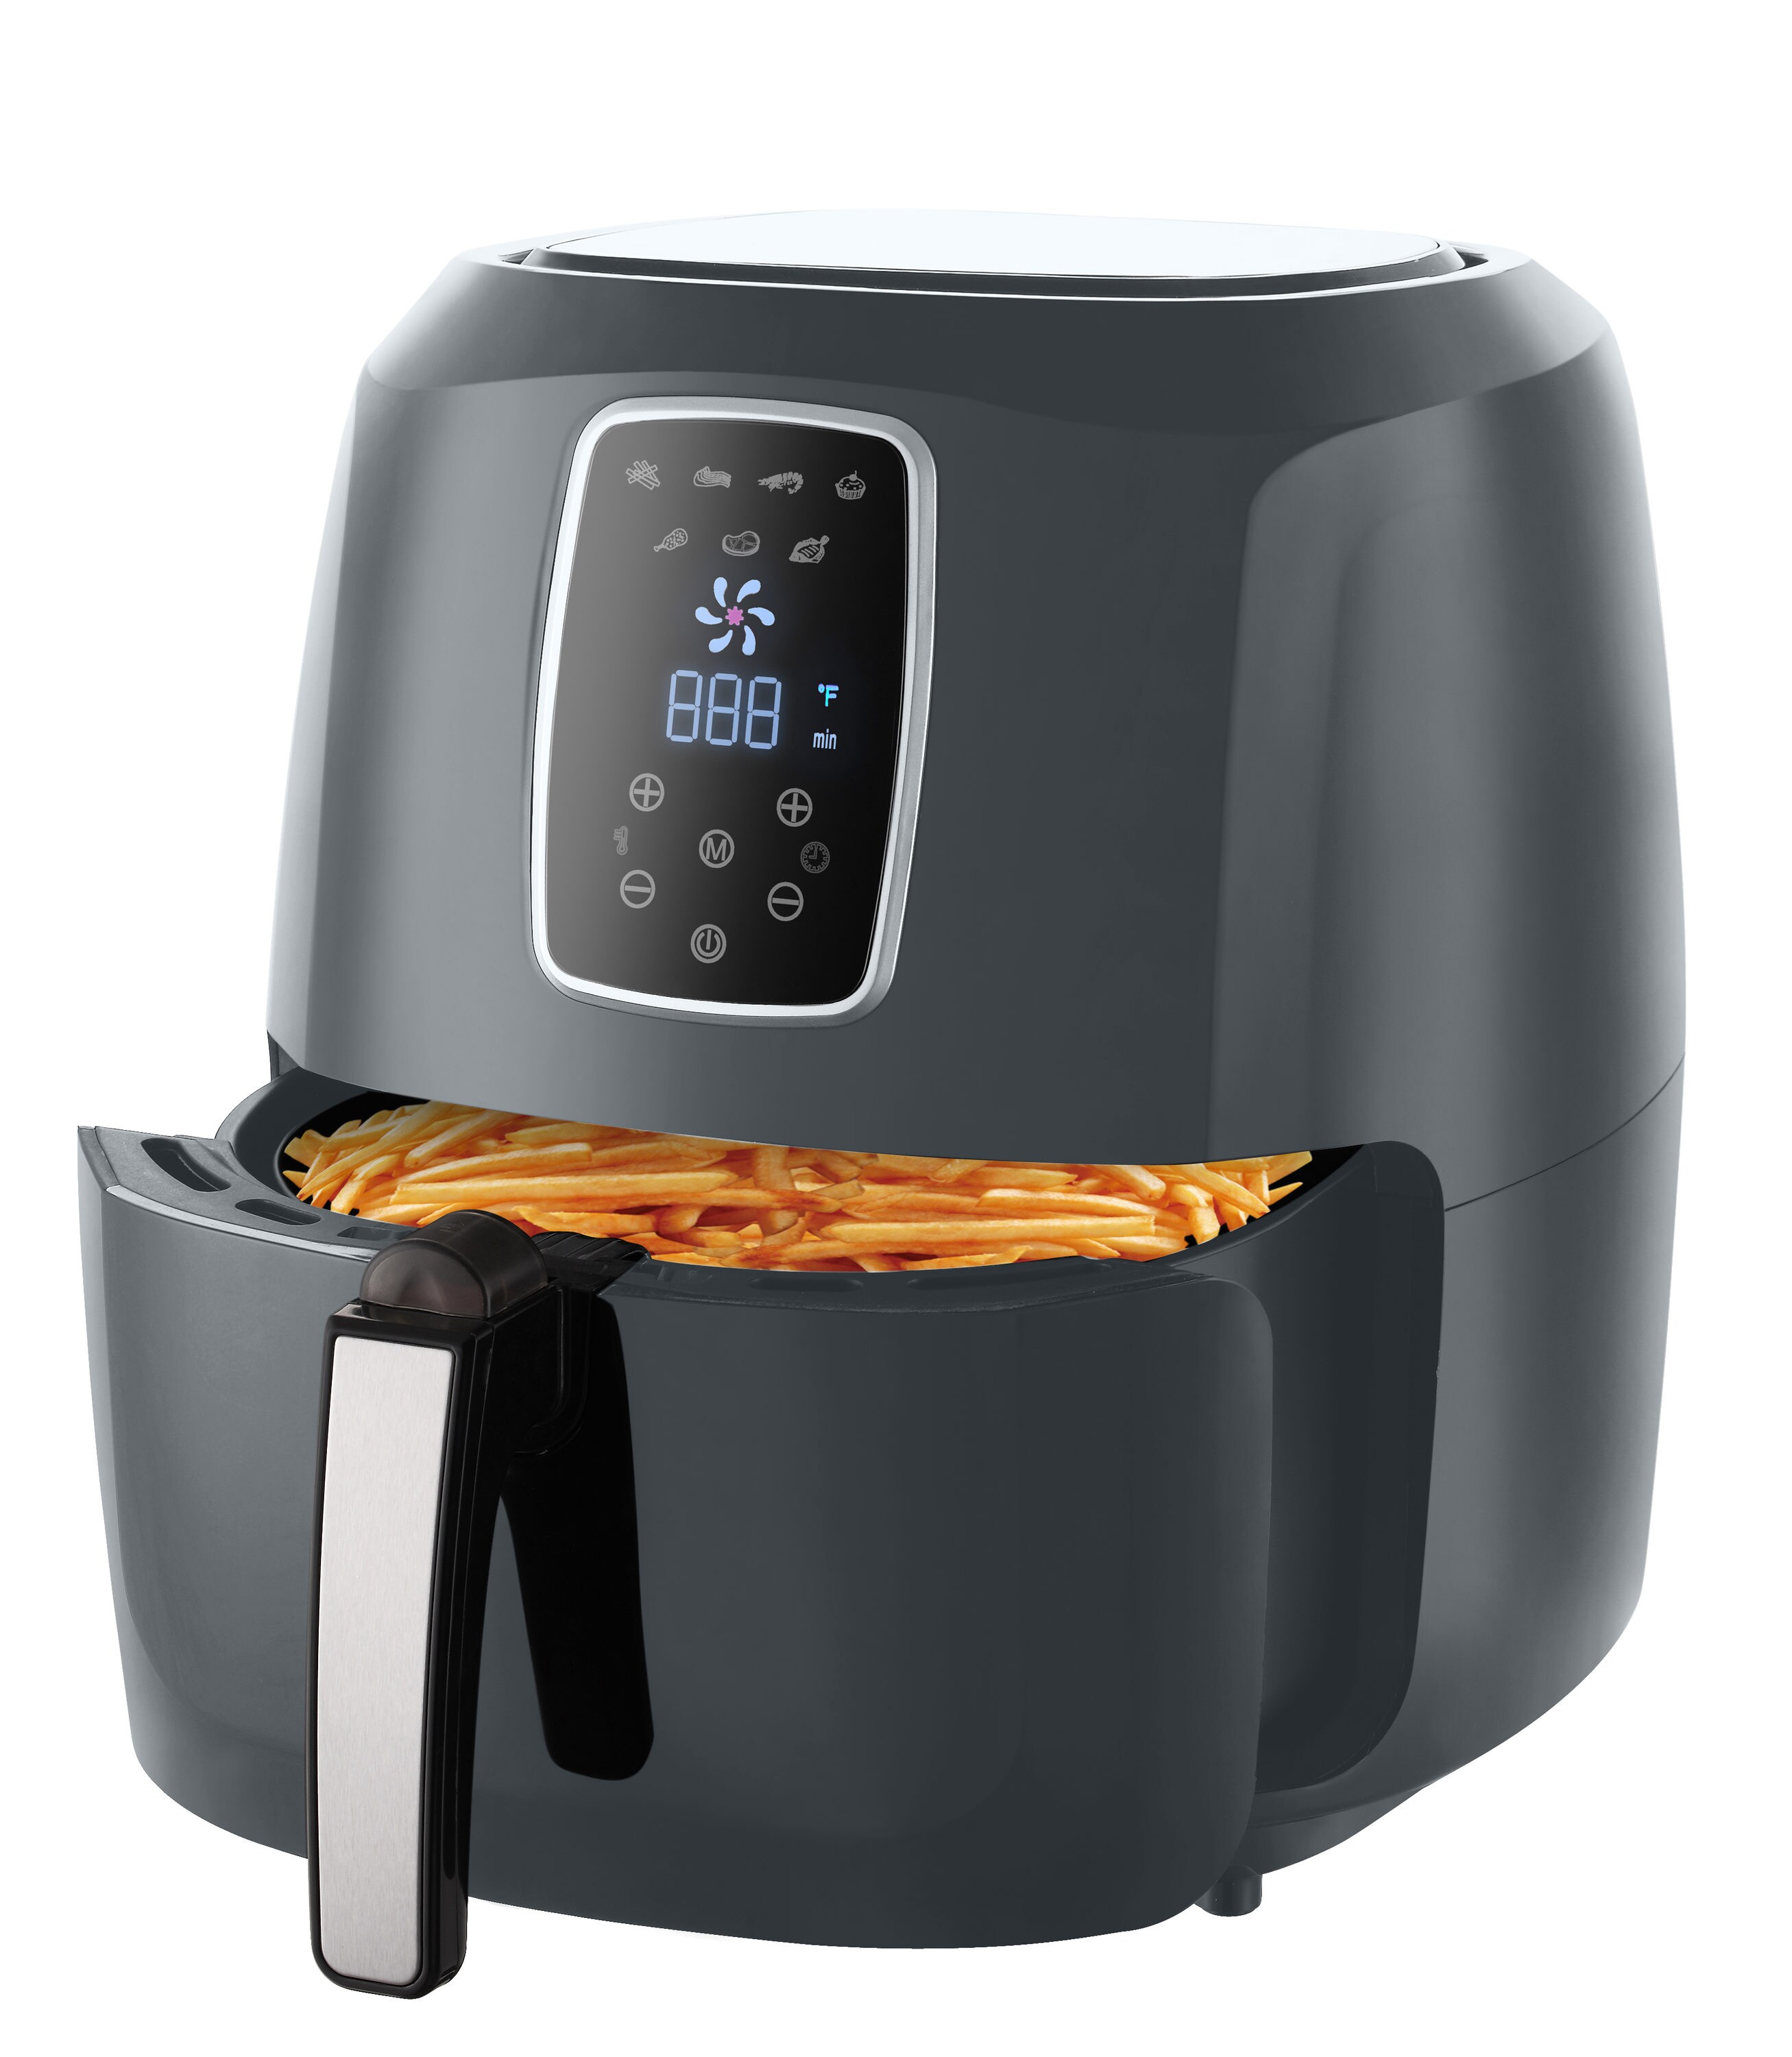 Air Fryer 3.2 qt Non-stick,Little-To-No-Oil,Frying,Baking,Grilling 900g/2lb USED